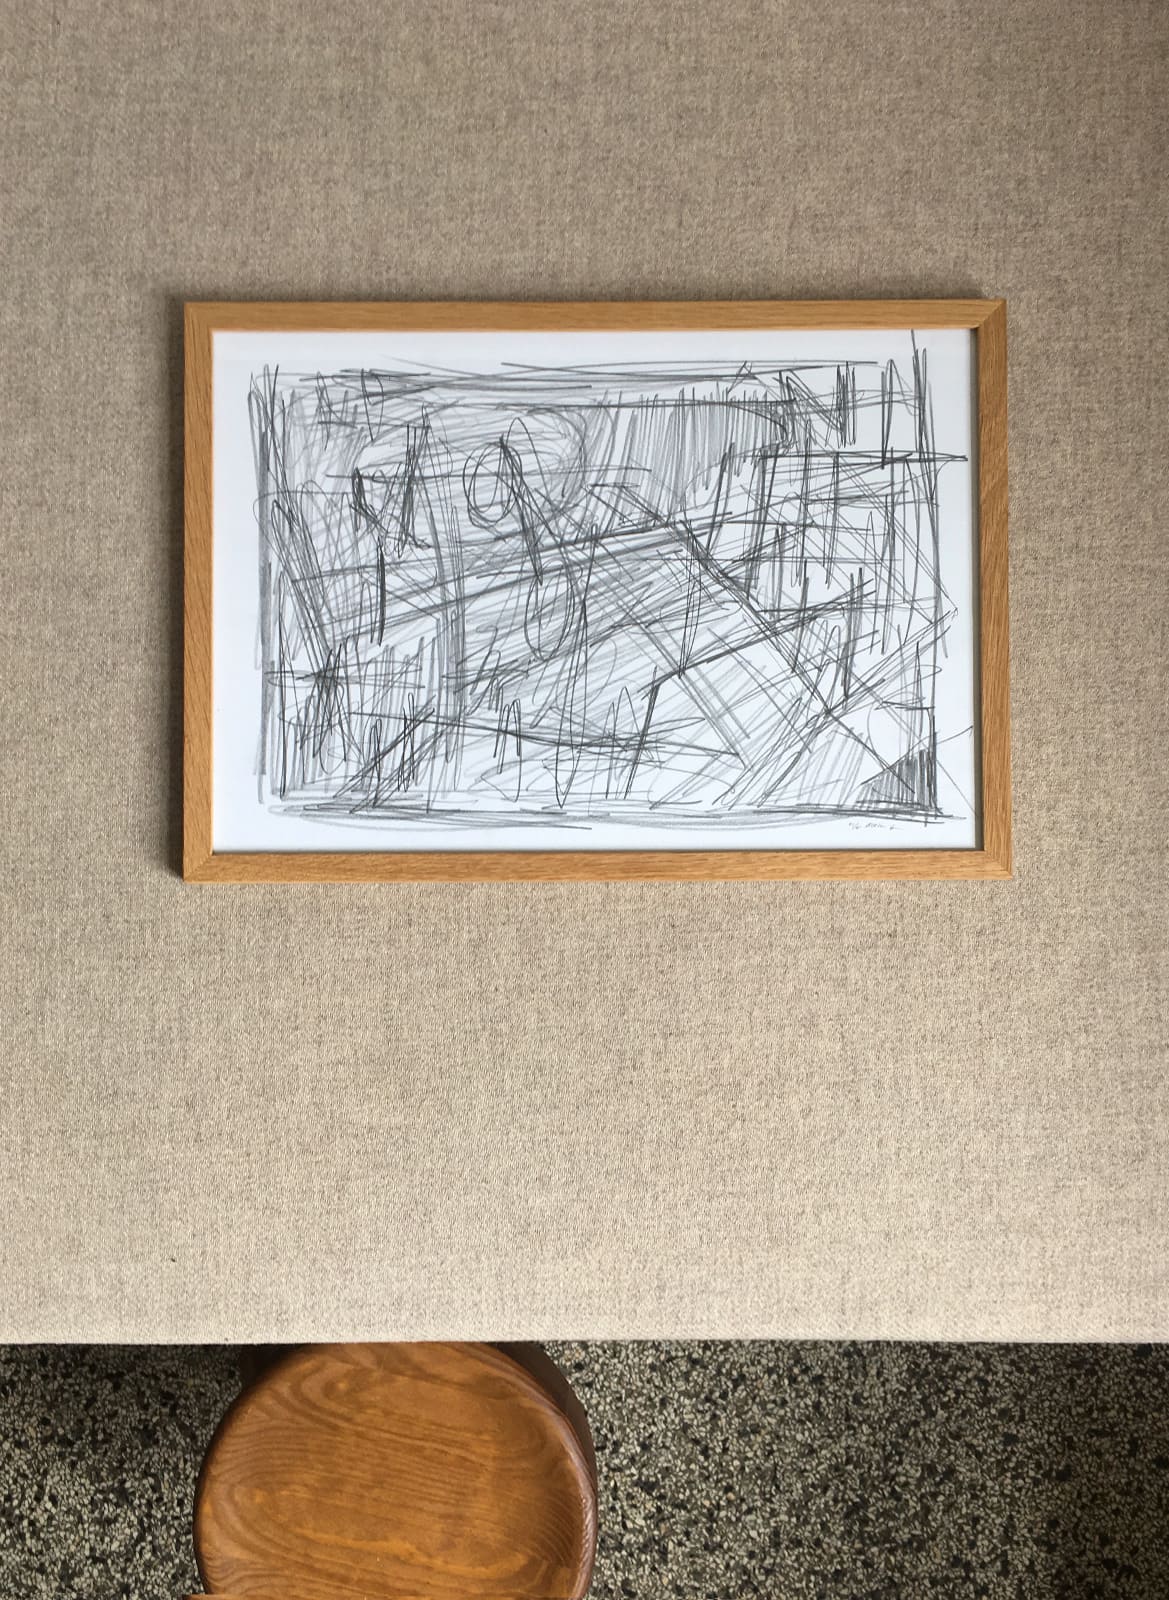 Framed limited edition art work showing chaotic pencil lines by Atelier Cph